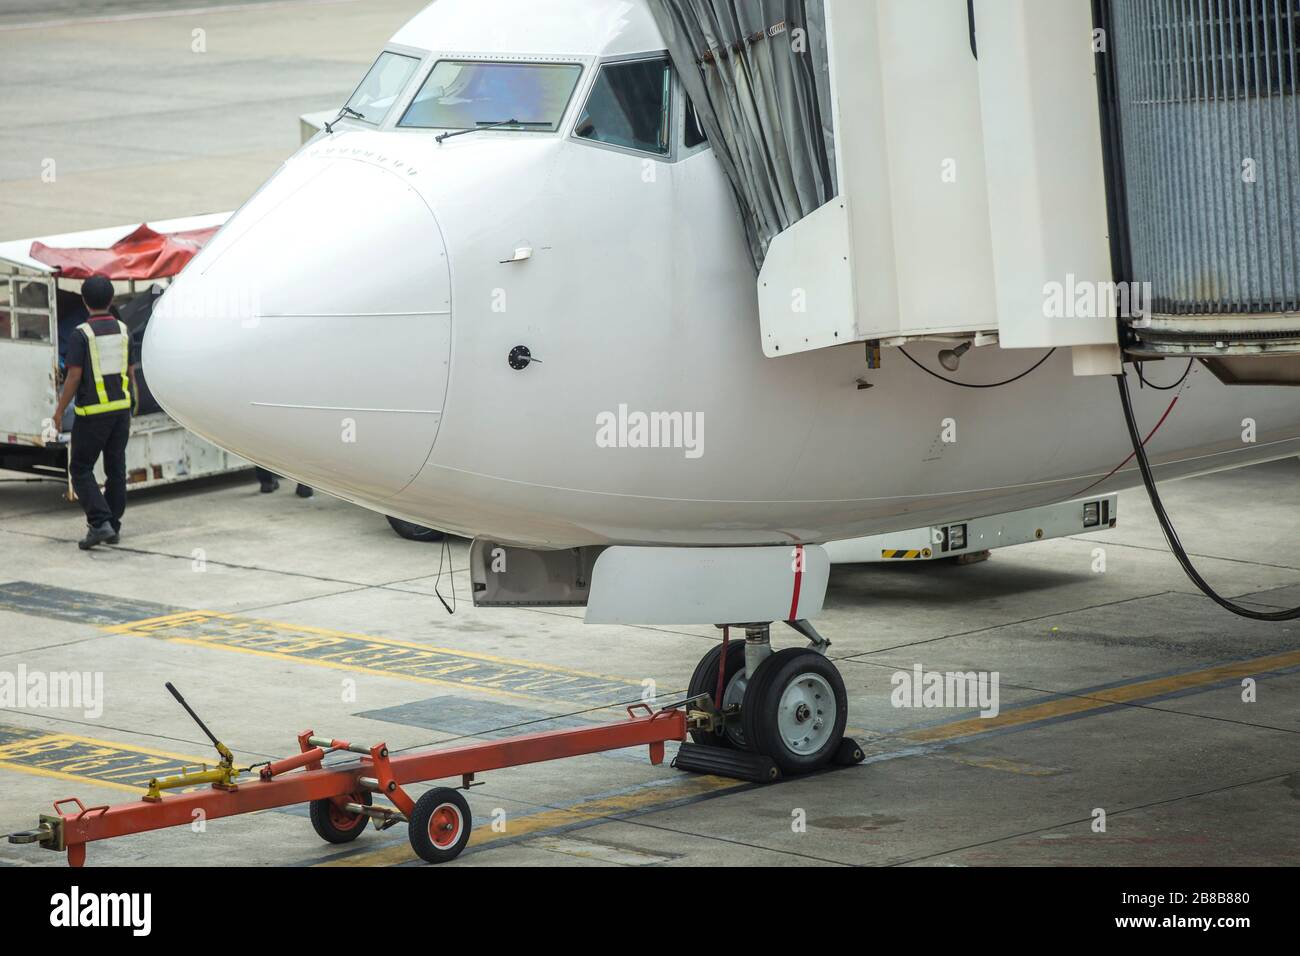 Close up on a white jetliner. Passenger plane at the airport. Suspended flights due to coronavirus outbreak. Stock Photo